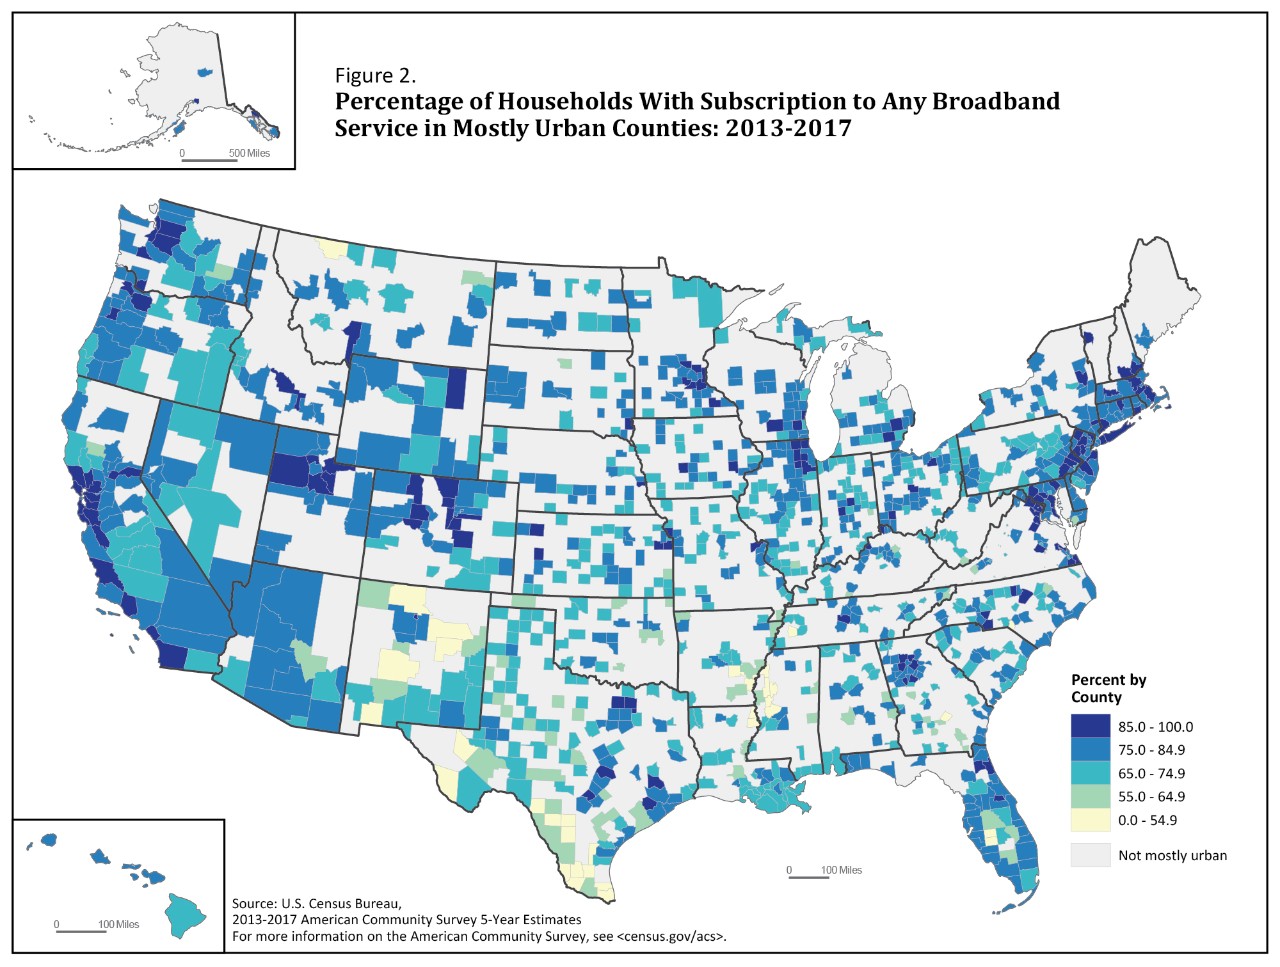 Figure 2. Percentage of Households With Subscription to Any Broadband Service in Mostly Urban Counties: 2013-2017